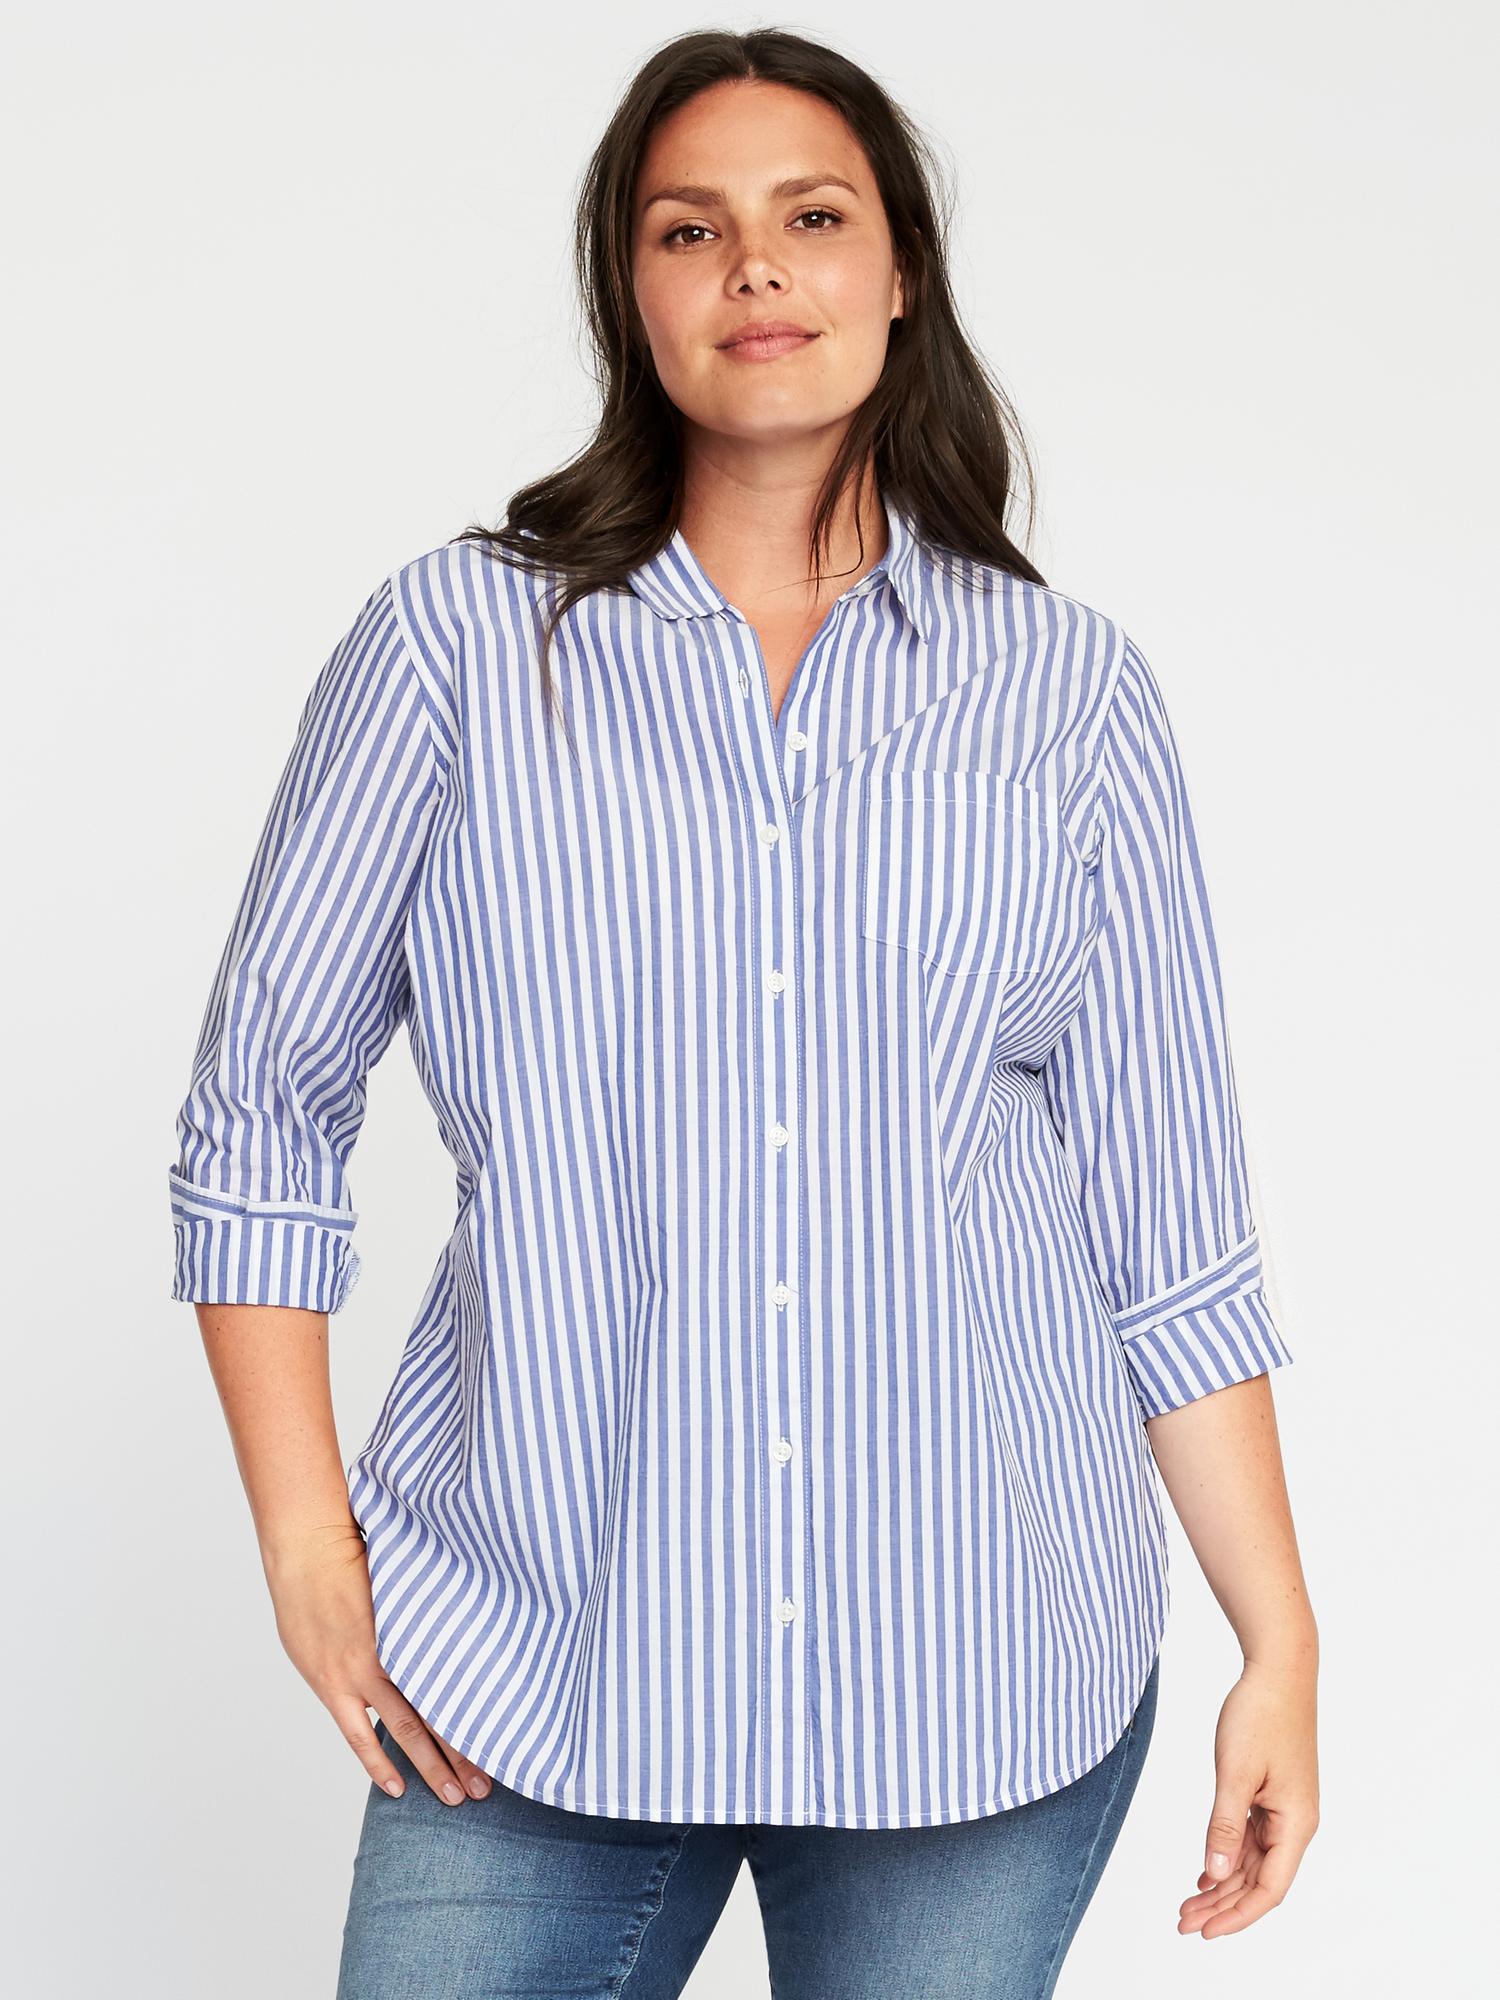 Classic Plus-Size Striped Tunic | Old Navy